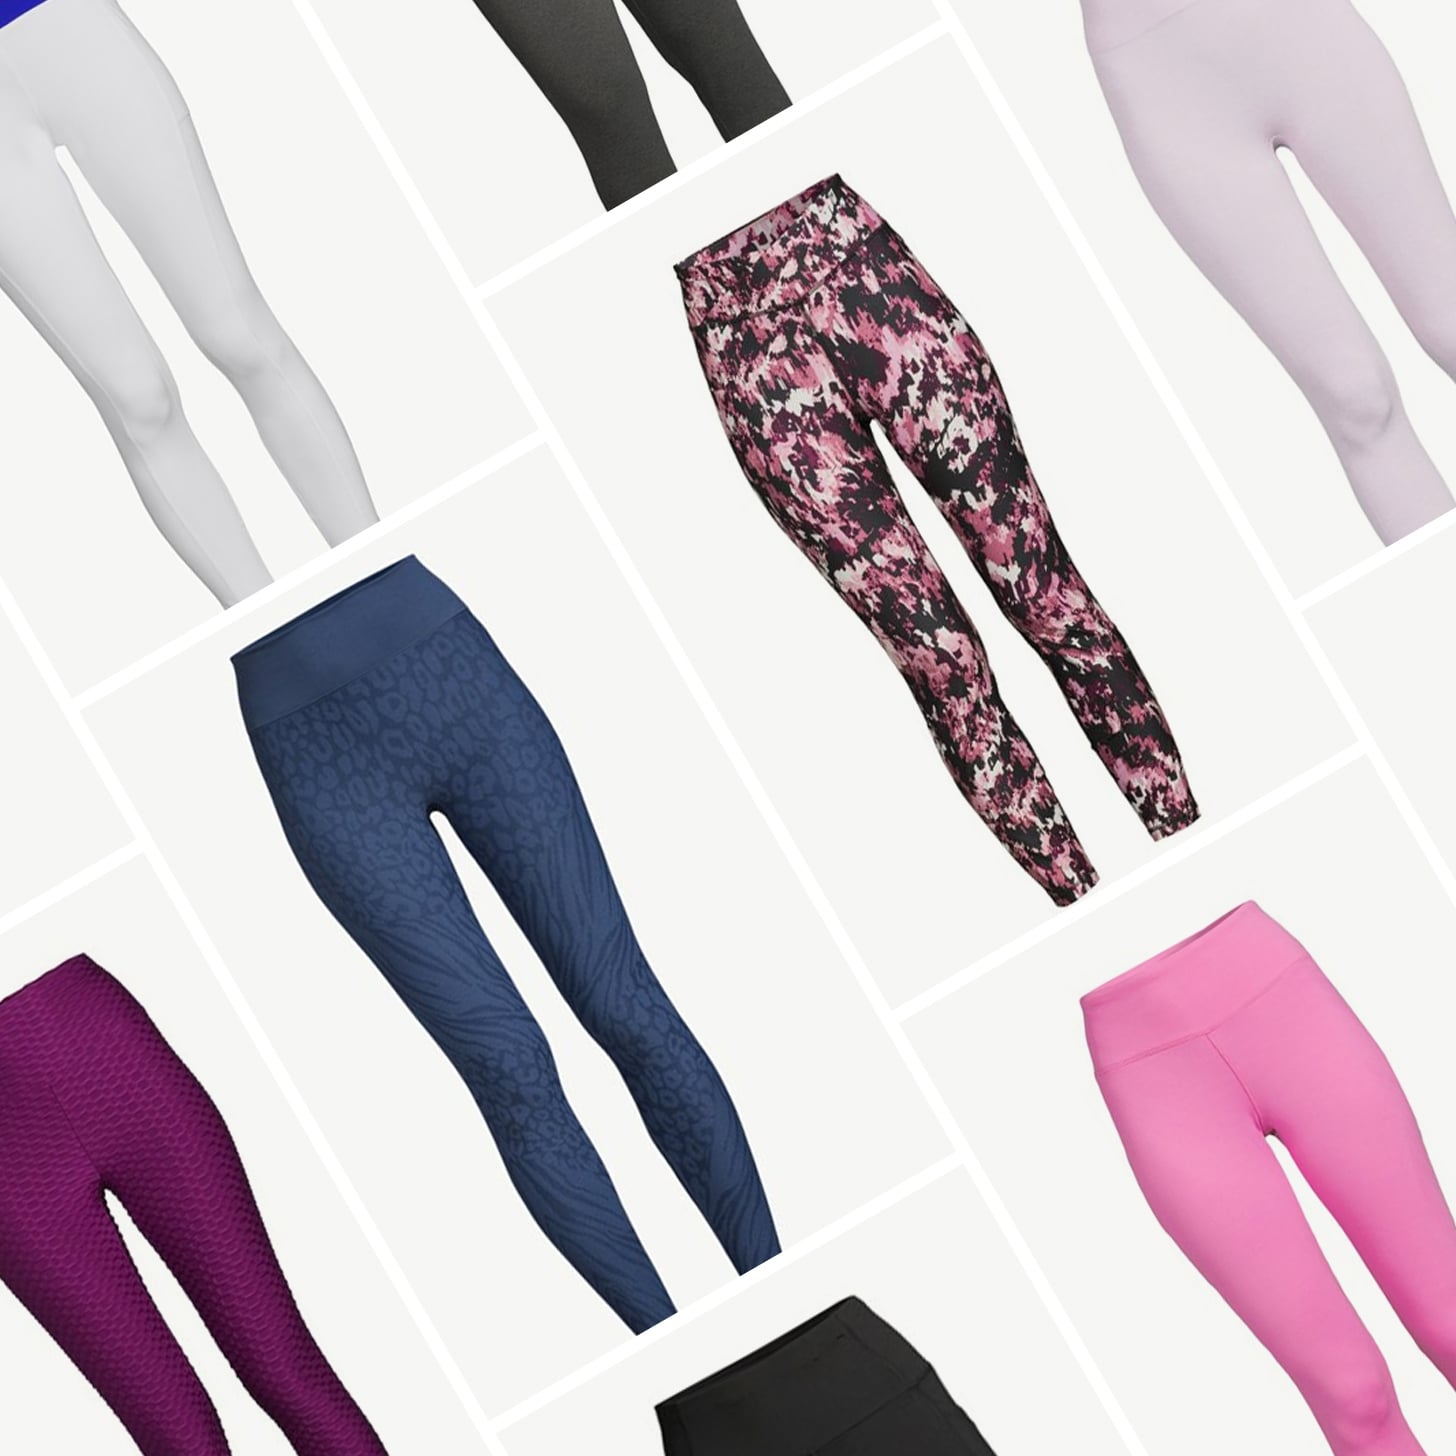 Stay stylish and comfortable with these Avia Yoga Pants